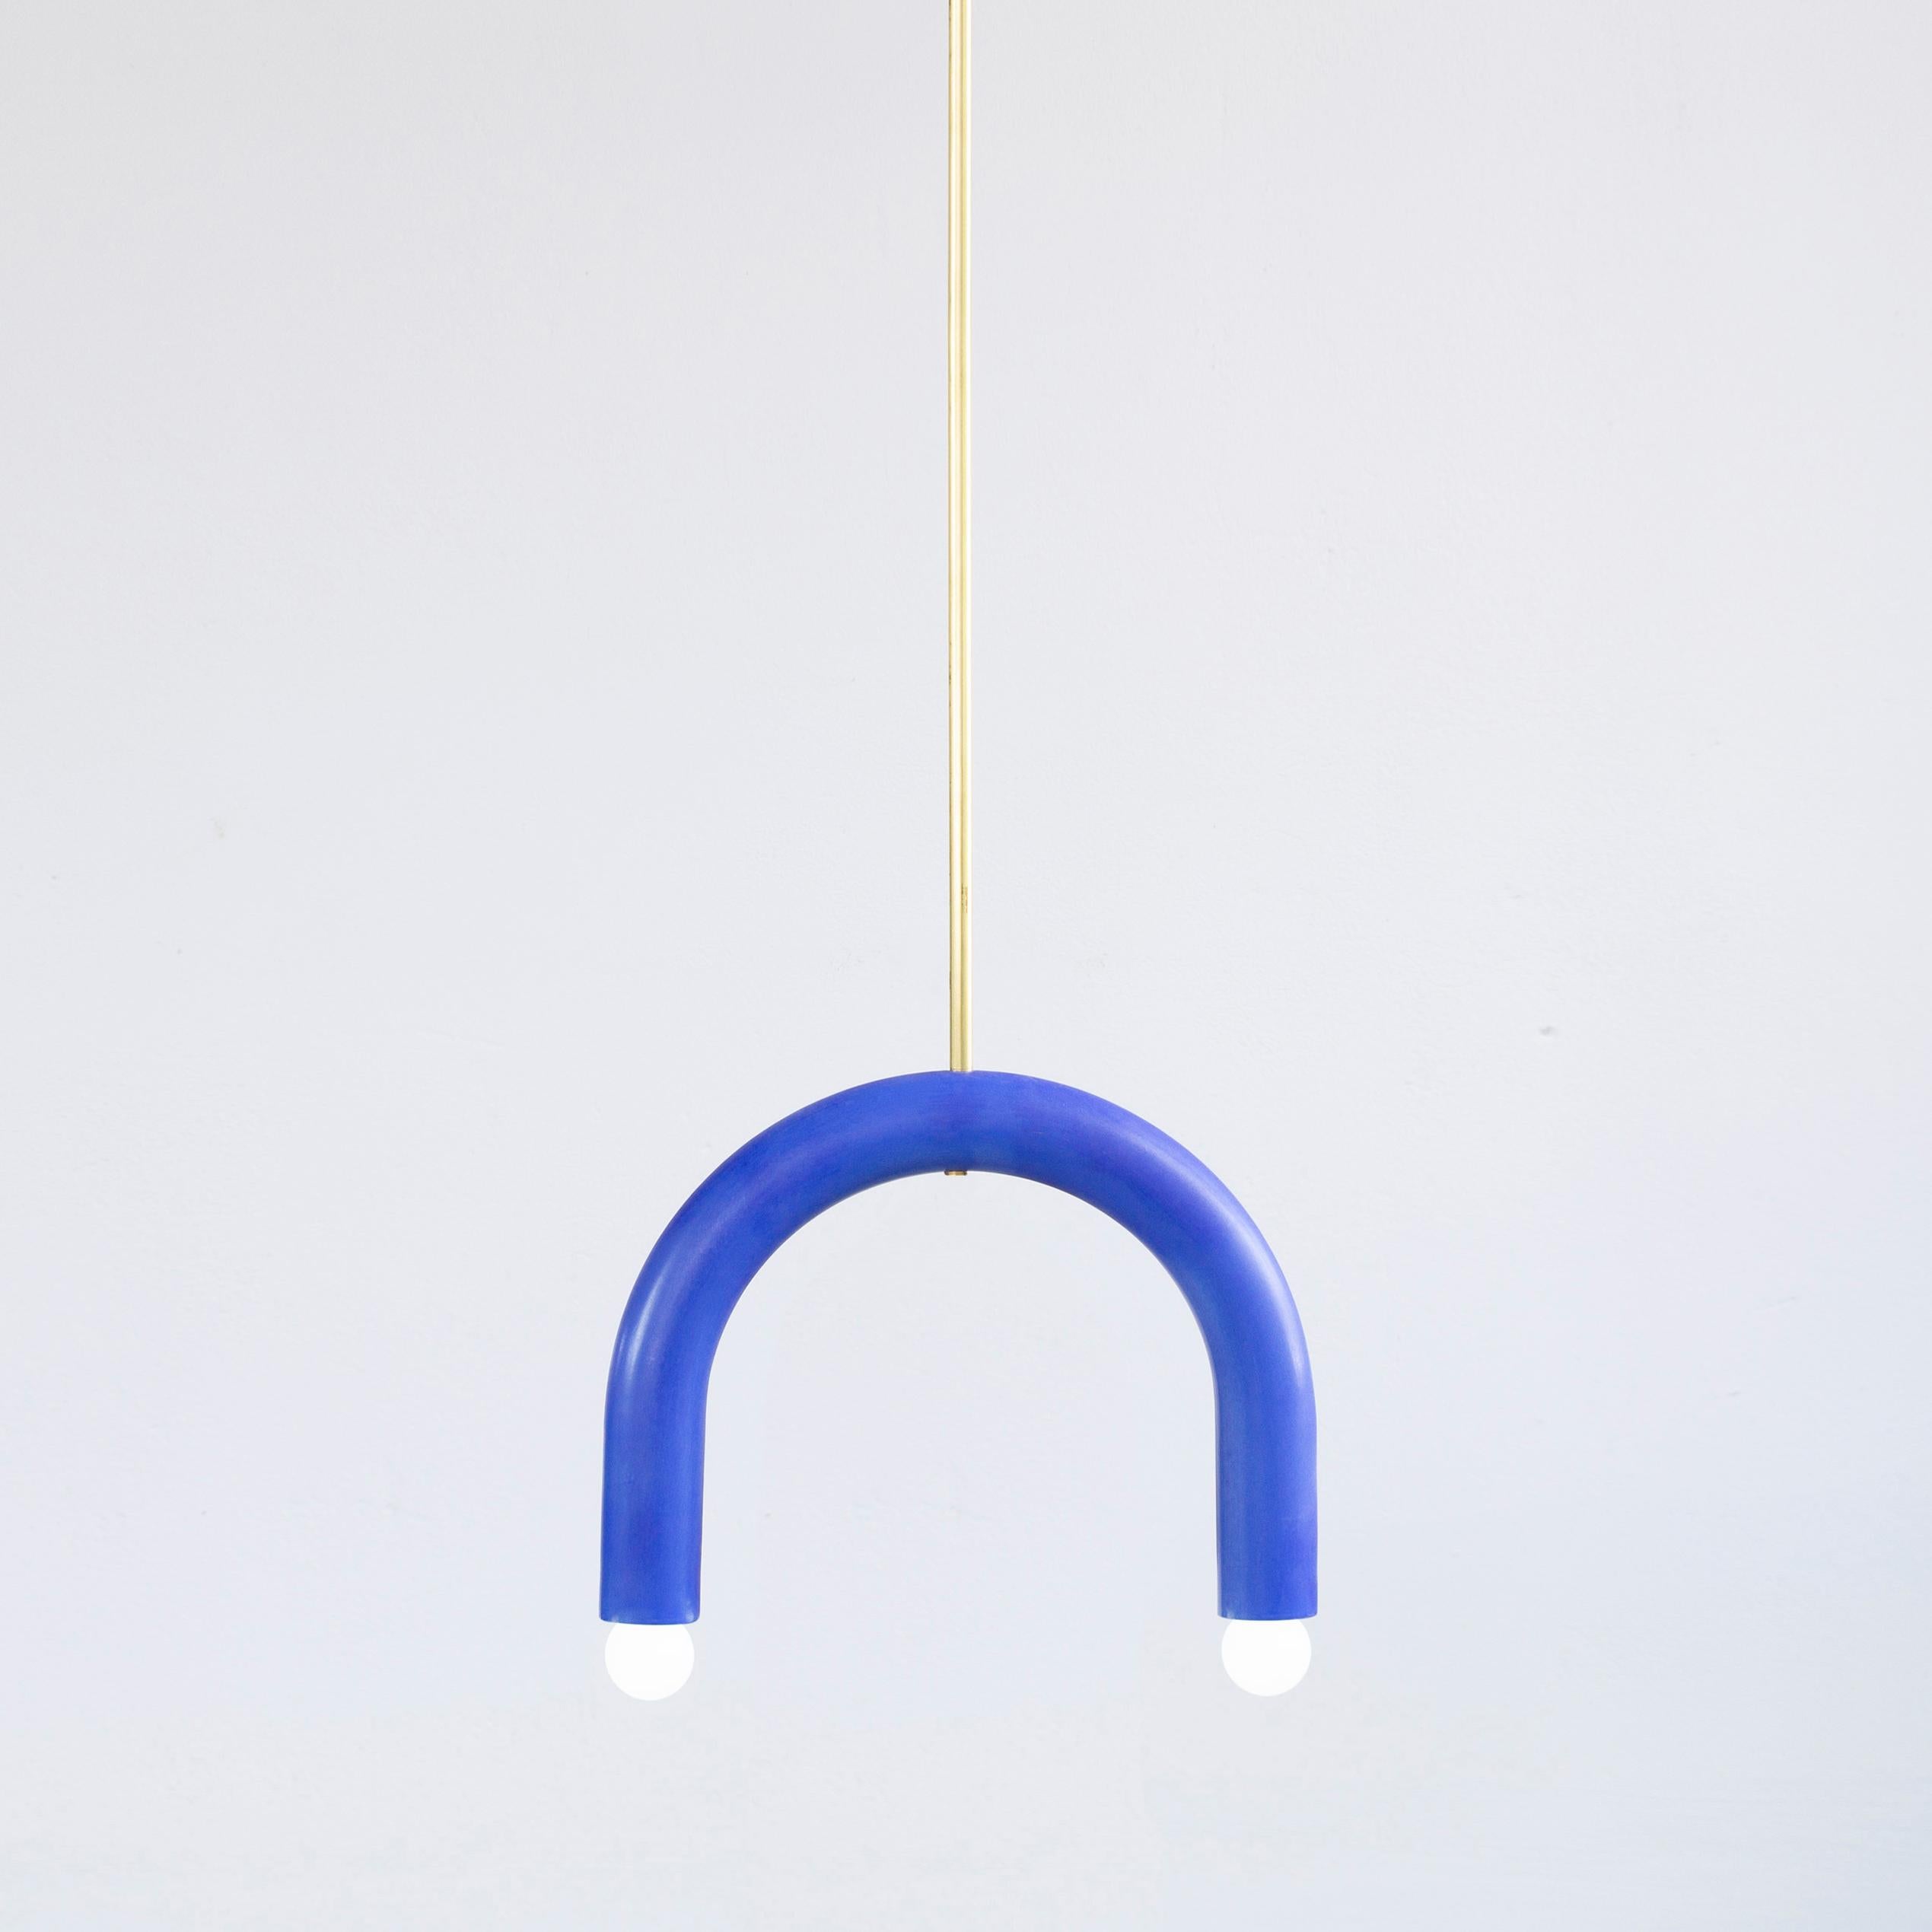 Cobalt TRN B1 pendant lamp by Pani Jurek
Dimensions: D 5 x W 35 x H 28 cm 
Material: Hand glazed ceramic and brass.
Available in other colors.
Lamps from the TRN collection hang on a metal tube, not on a cable. This allows the lamp to be mounted in